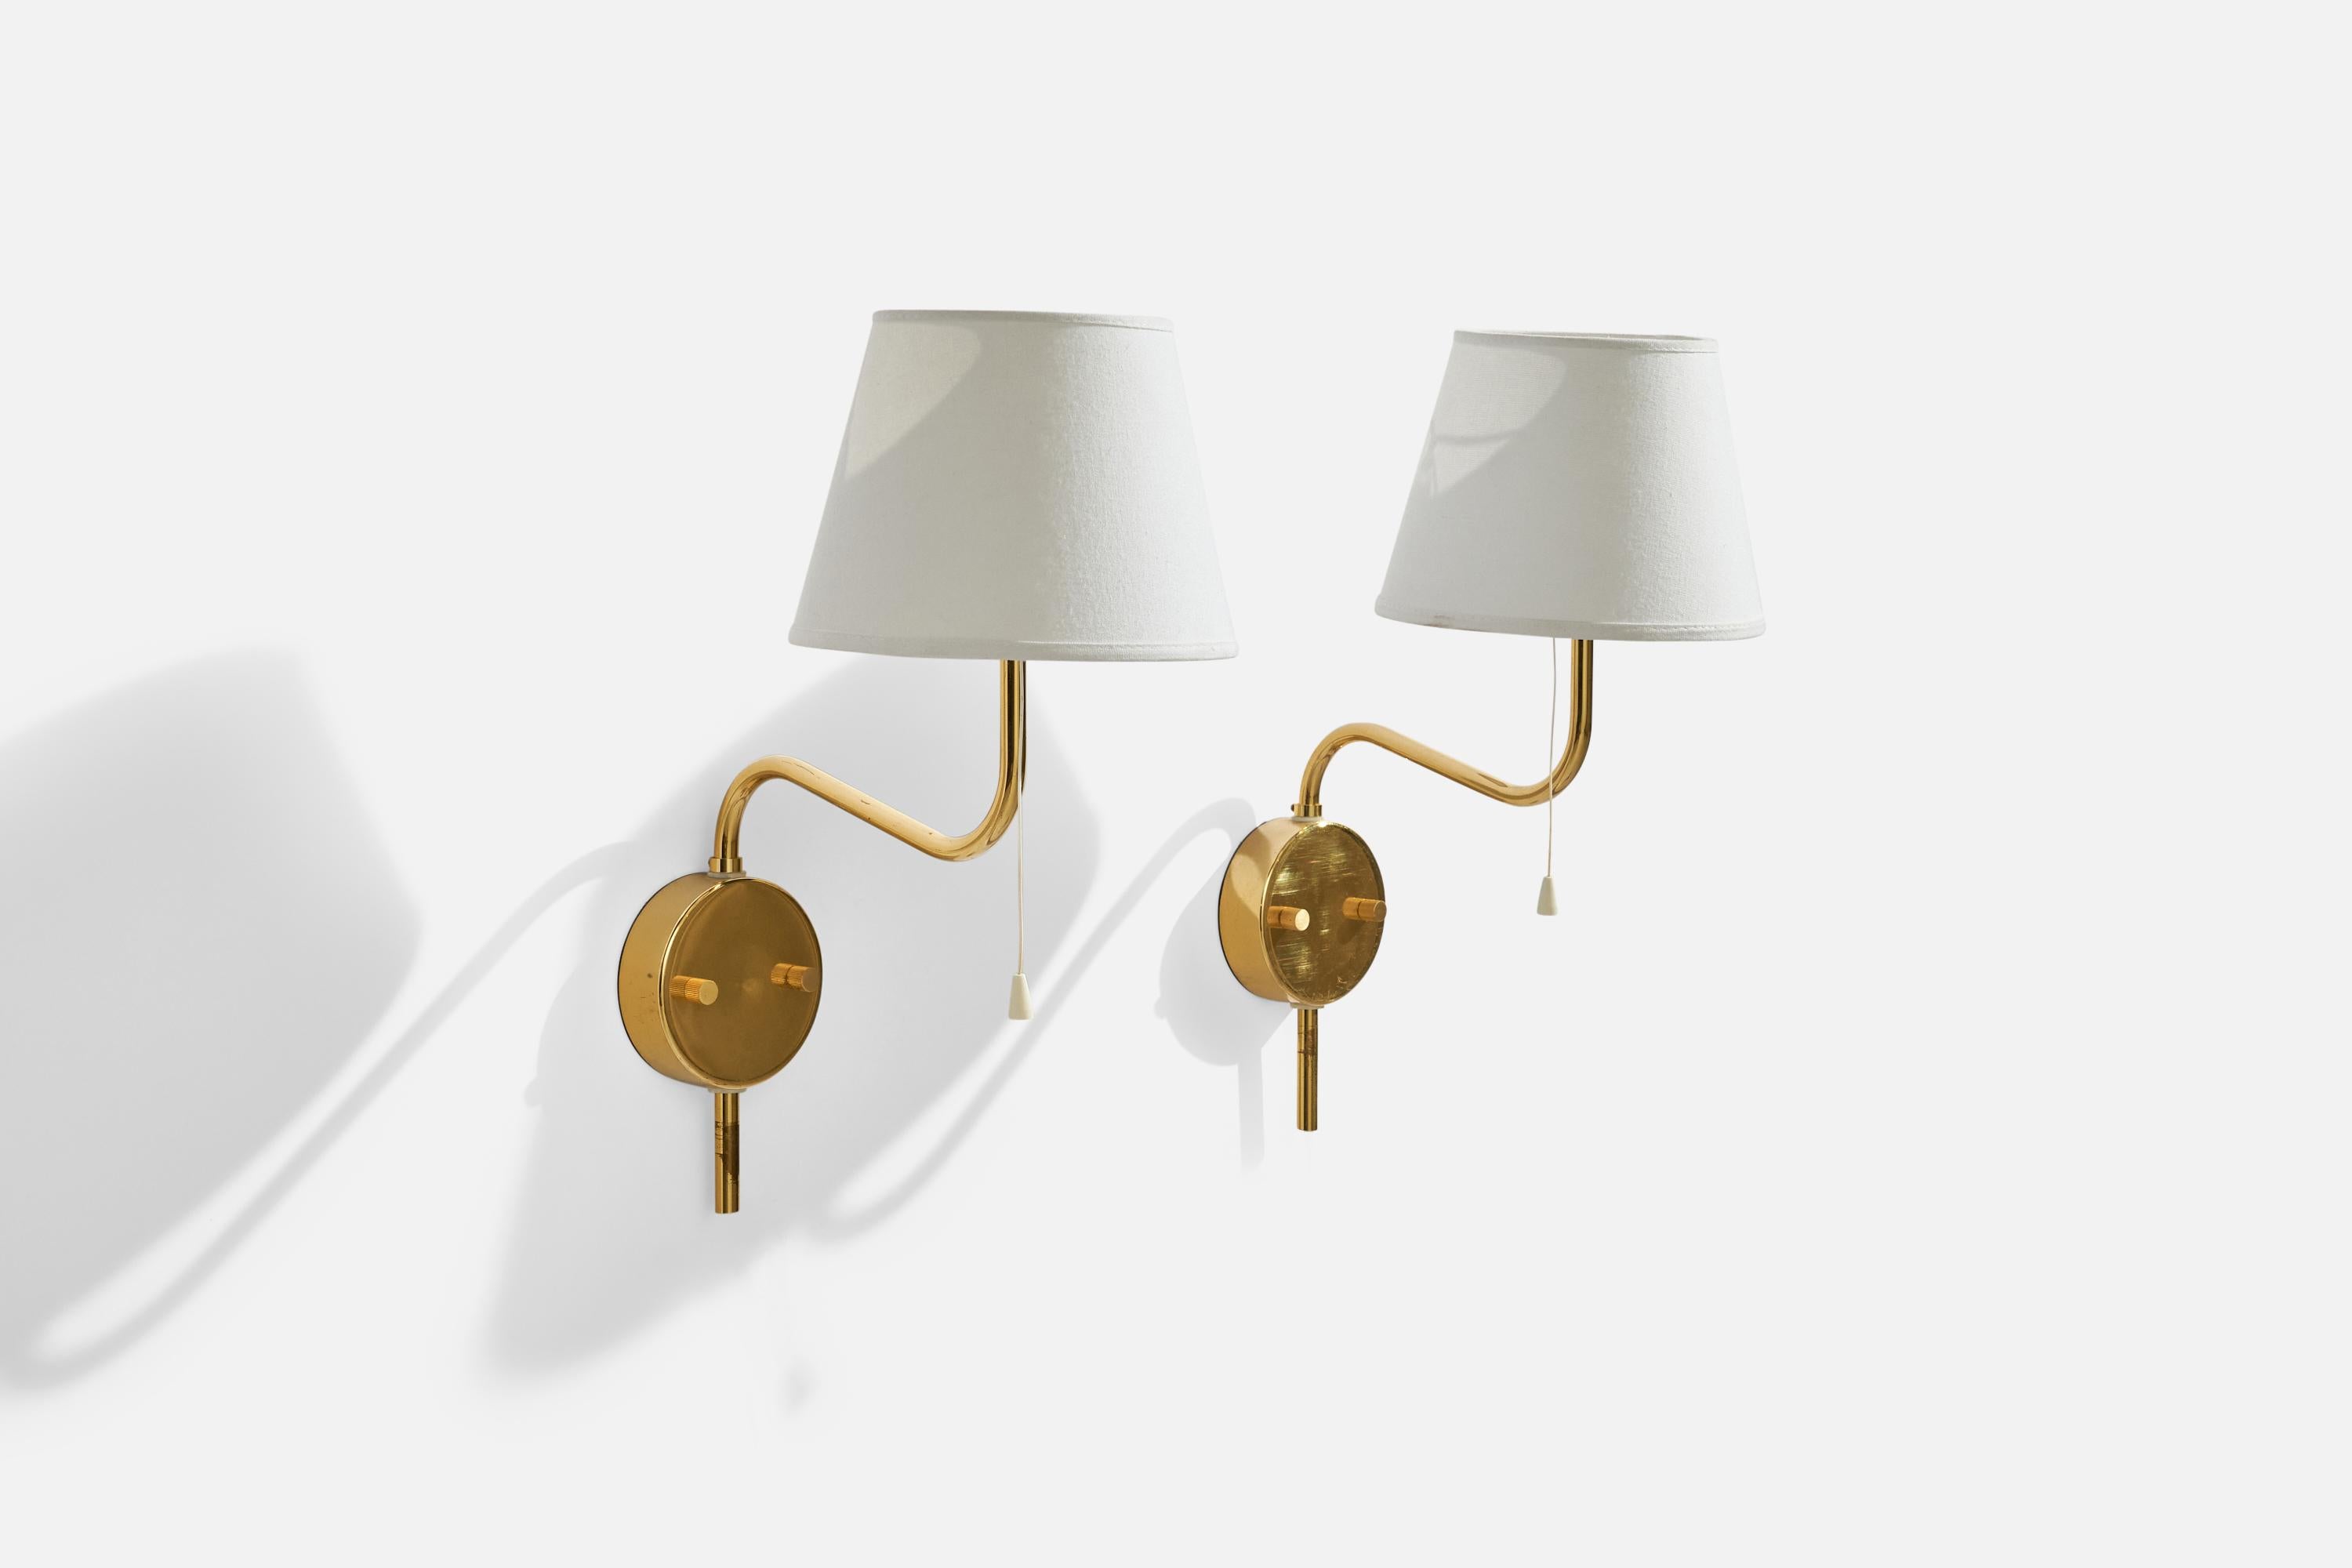 A pair of adjustable brass and white fabric wall lights designed and produced by Bergboms, Sweden, c. 1980s.

Overall Dimensions (inches): 18” H x 8”  W x 12” D
Back Plate Dimensions (inches): 4” H x 4”  W x 1.25”  D
Bulb Specifications: E-26